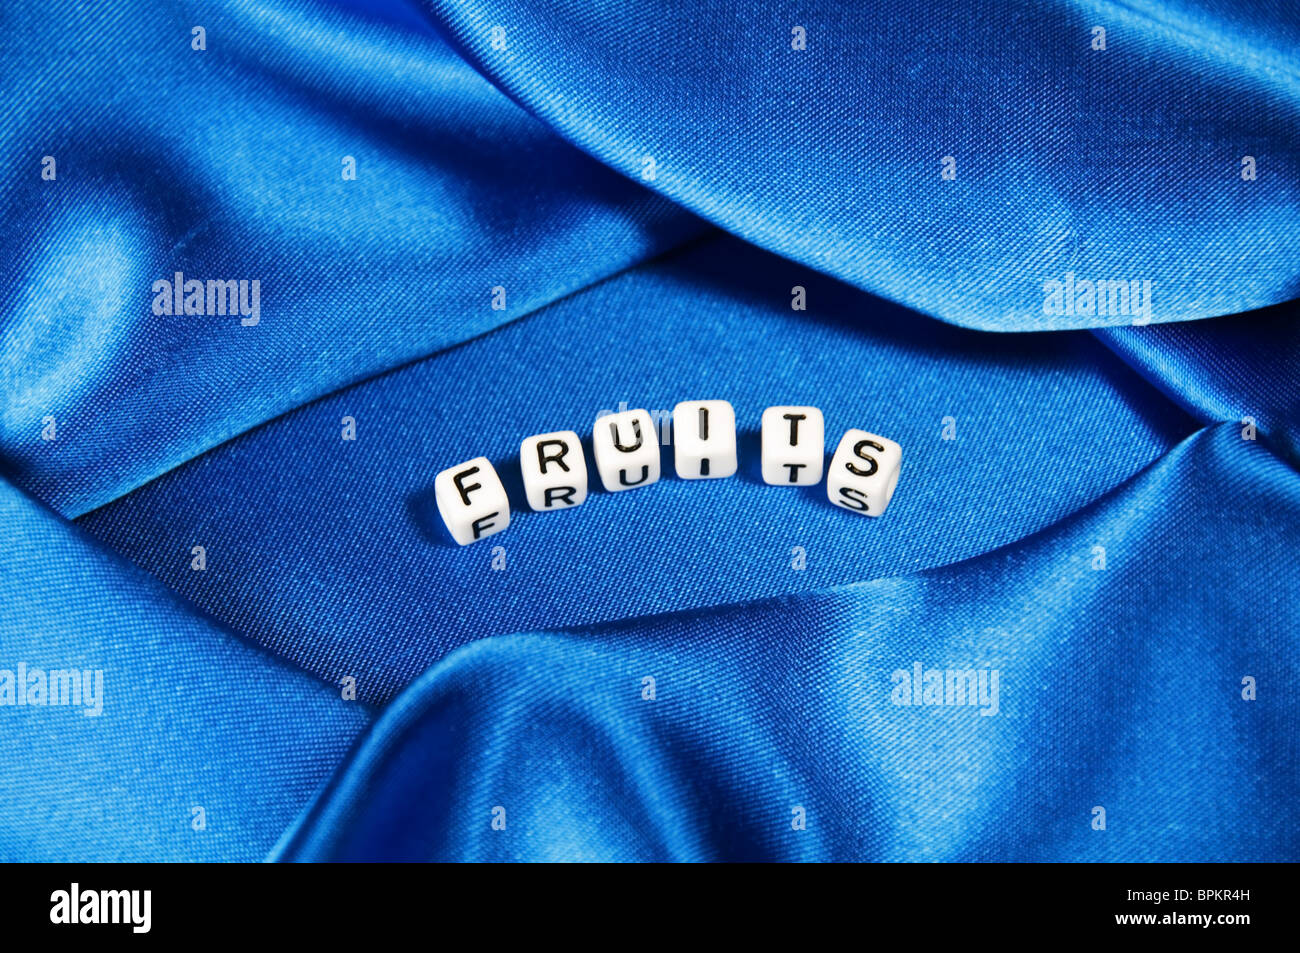 Royal blue satin background with rich folds and wrinkles for texture is the word fruits in black and white cube lettering series Stock Photo